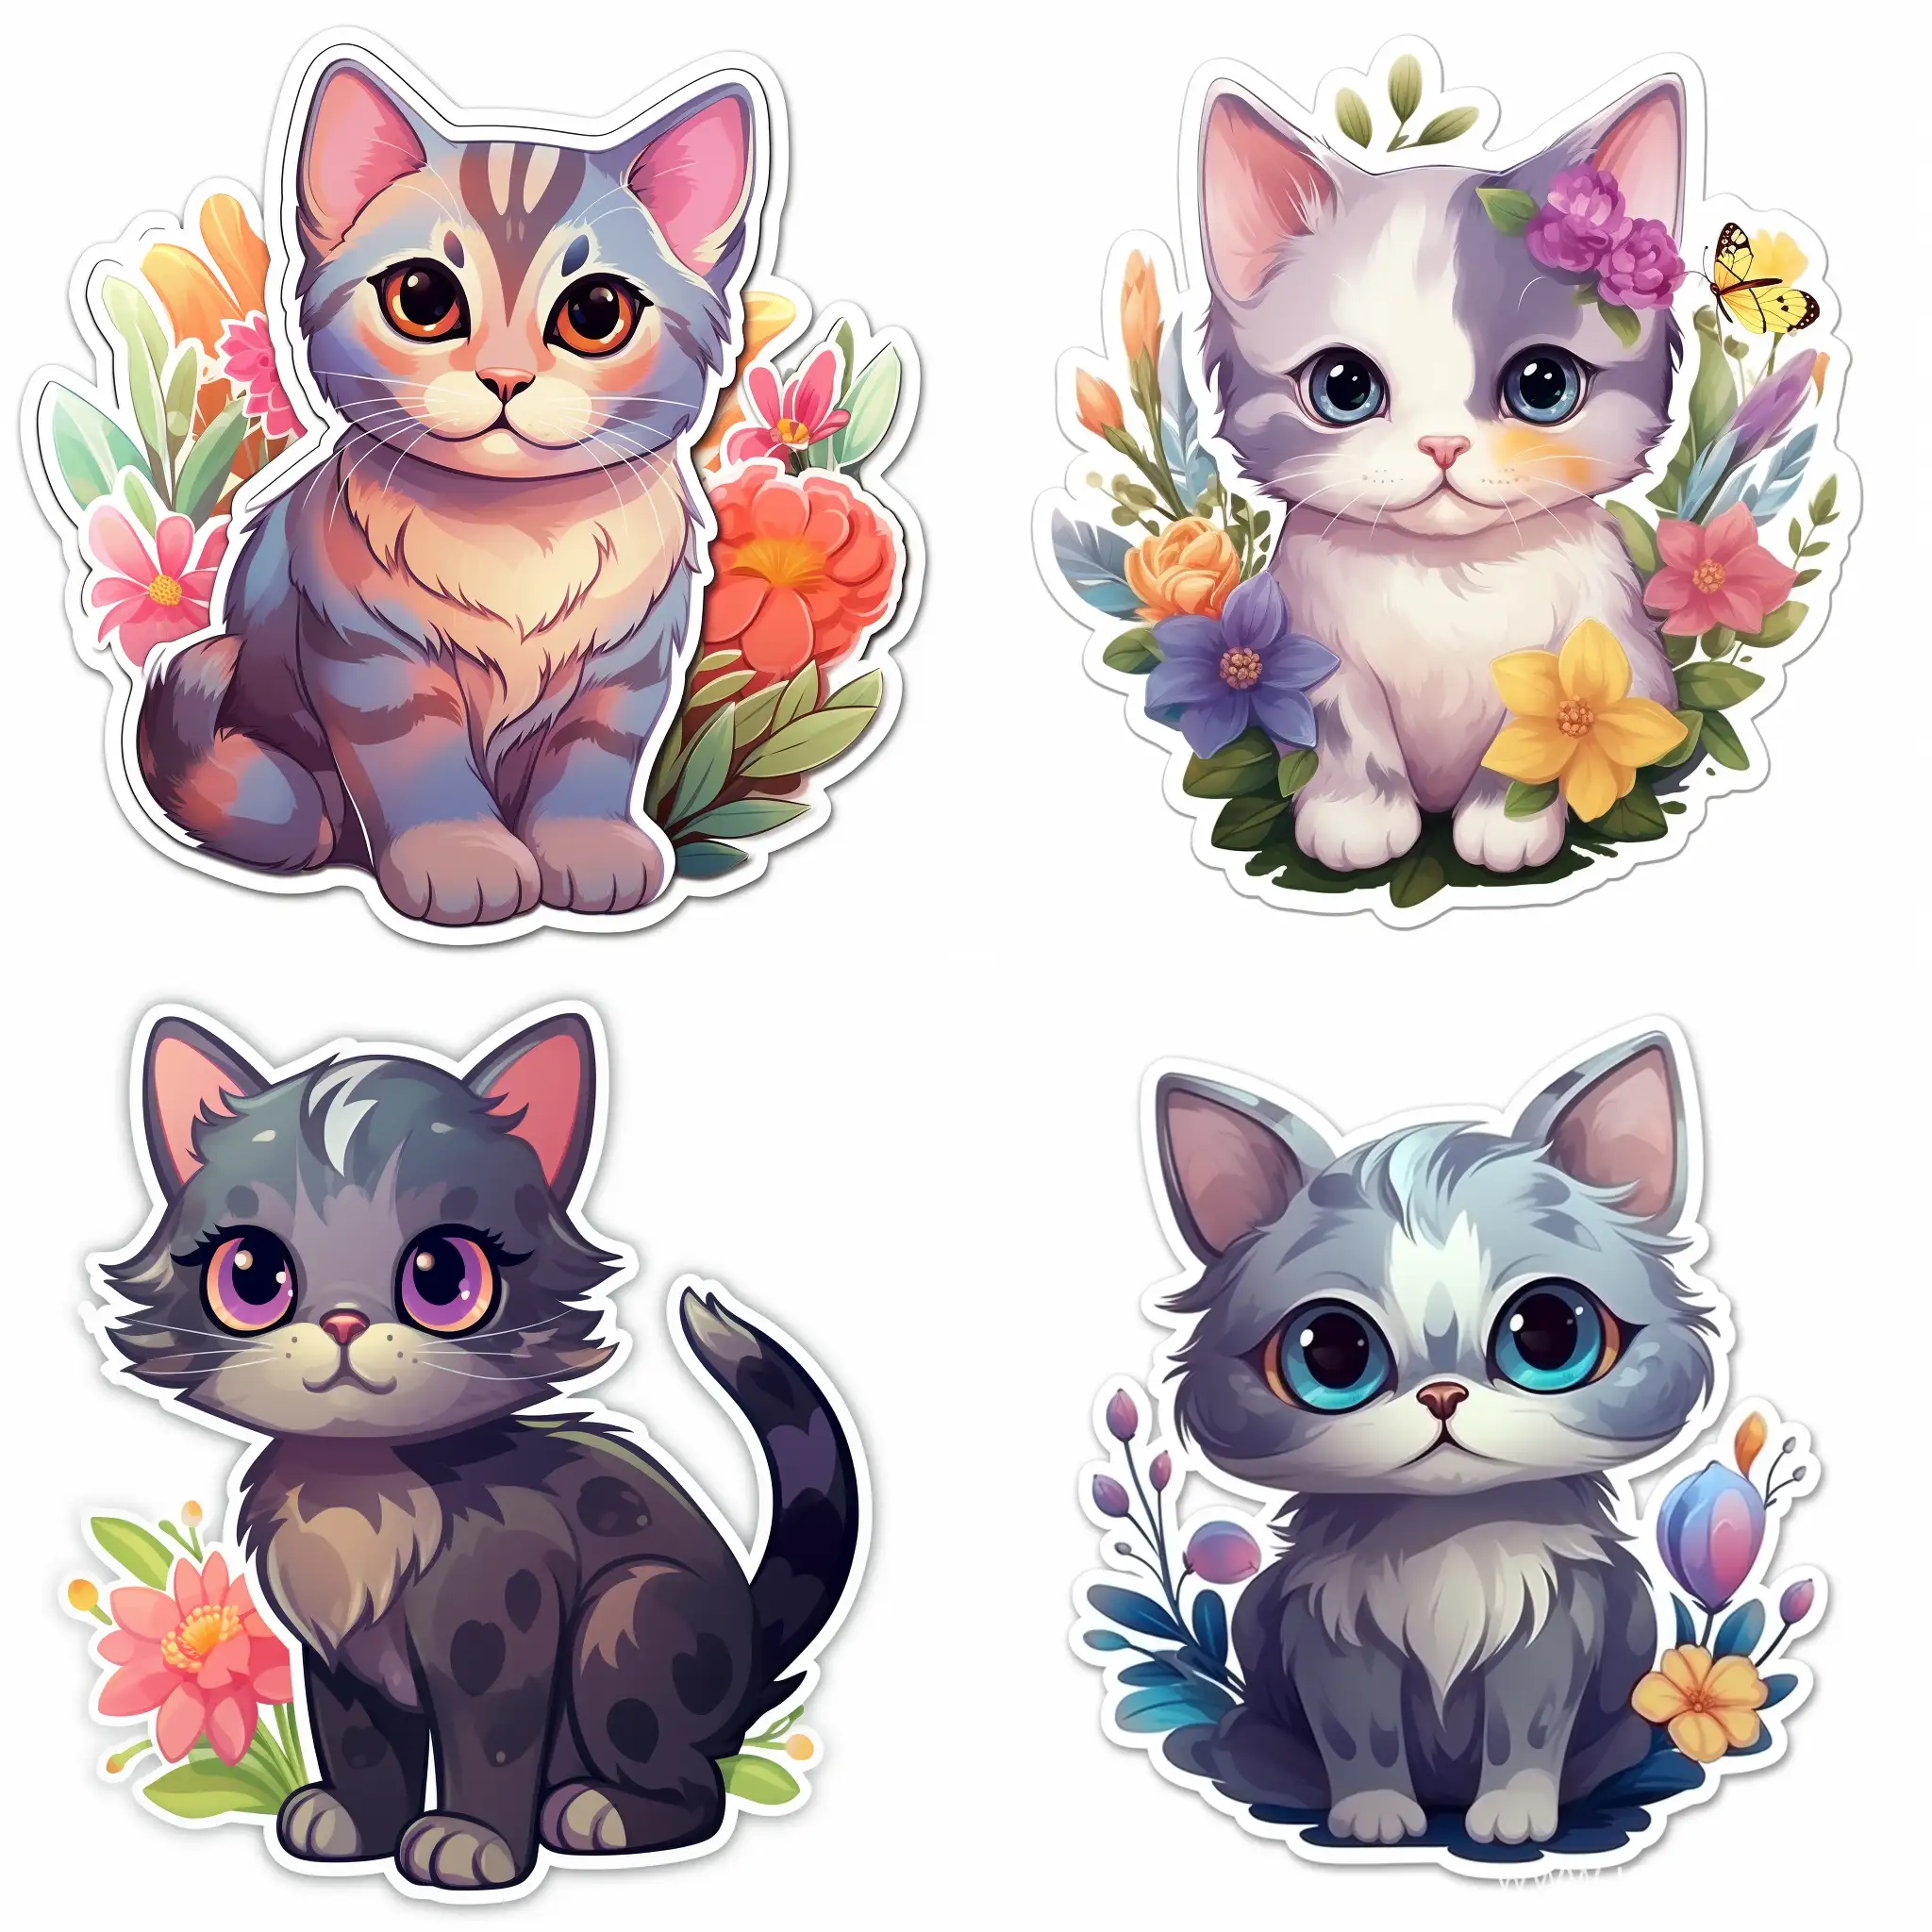 Adorable-Cat-Sticker-with-Playful-Poses-and-Vibrant-Colors